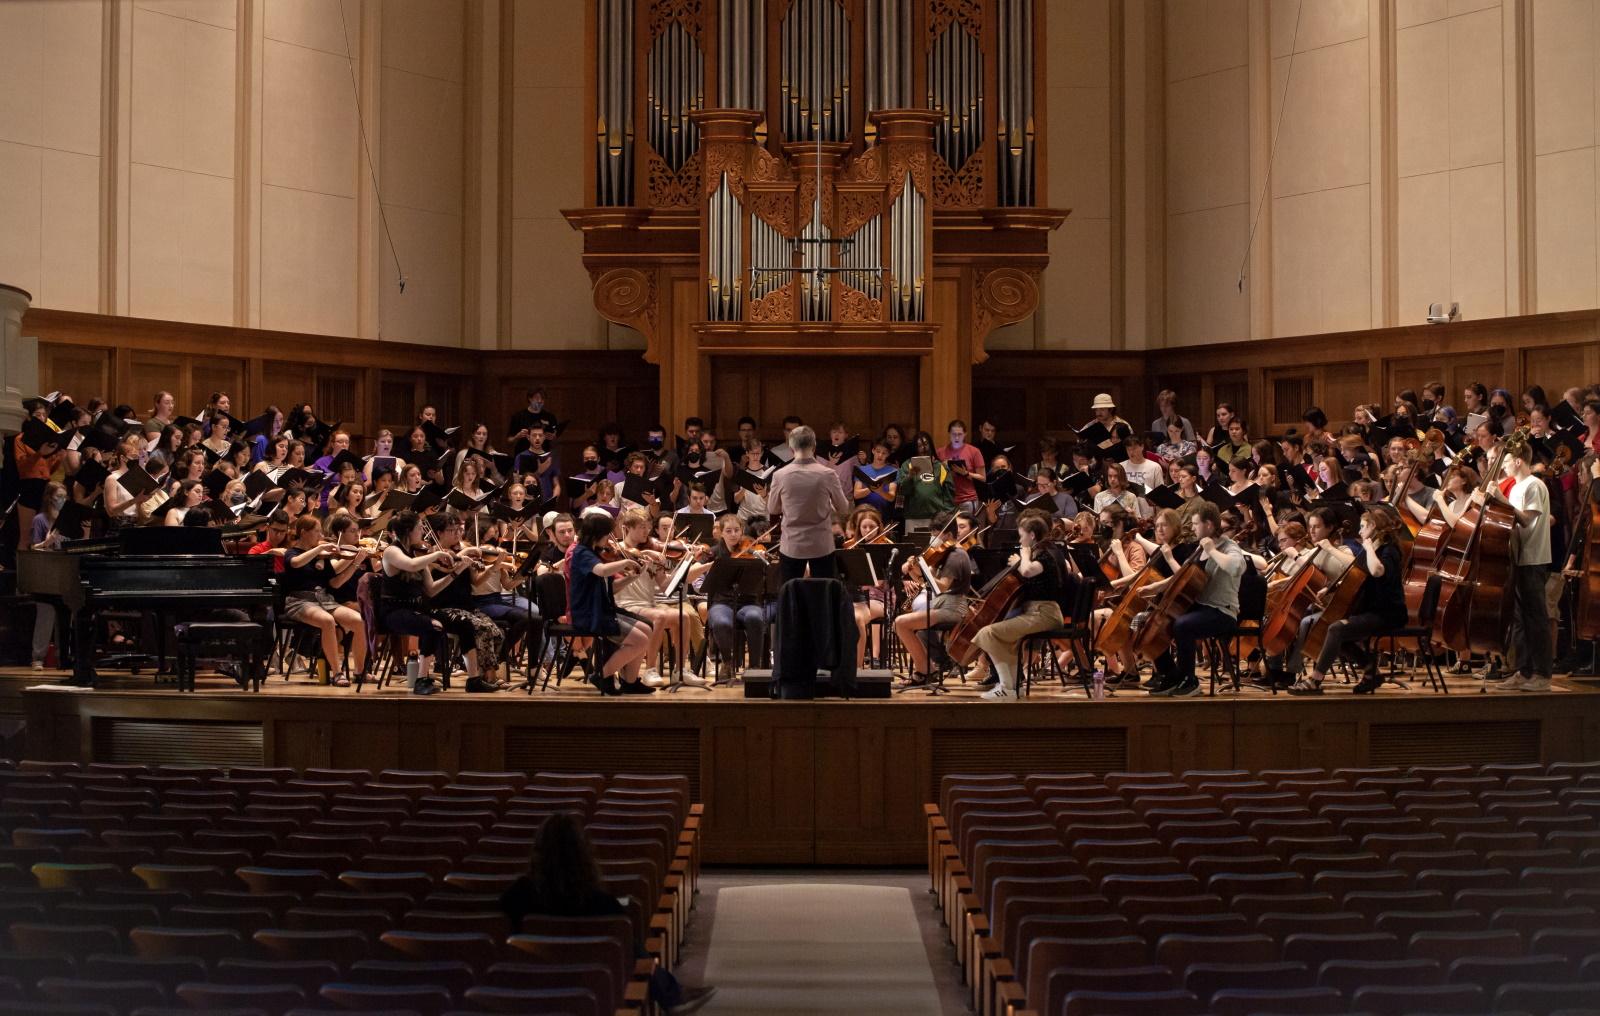 Phillip Swan leads the orchestra and choirs in a rehearsal on the Memorial Chapel stage.